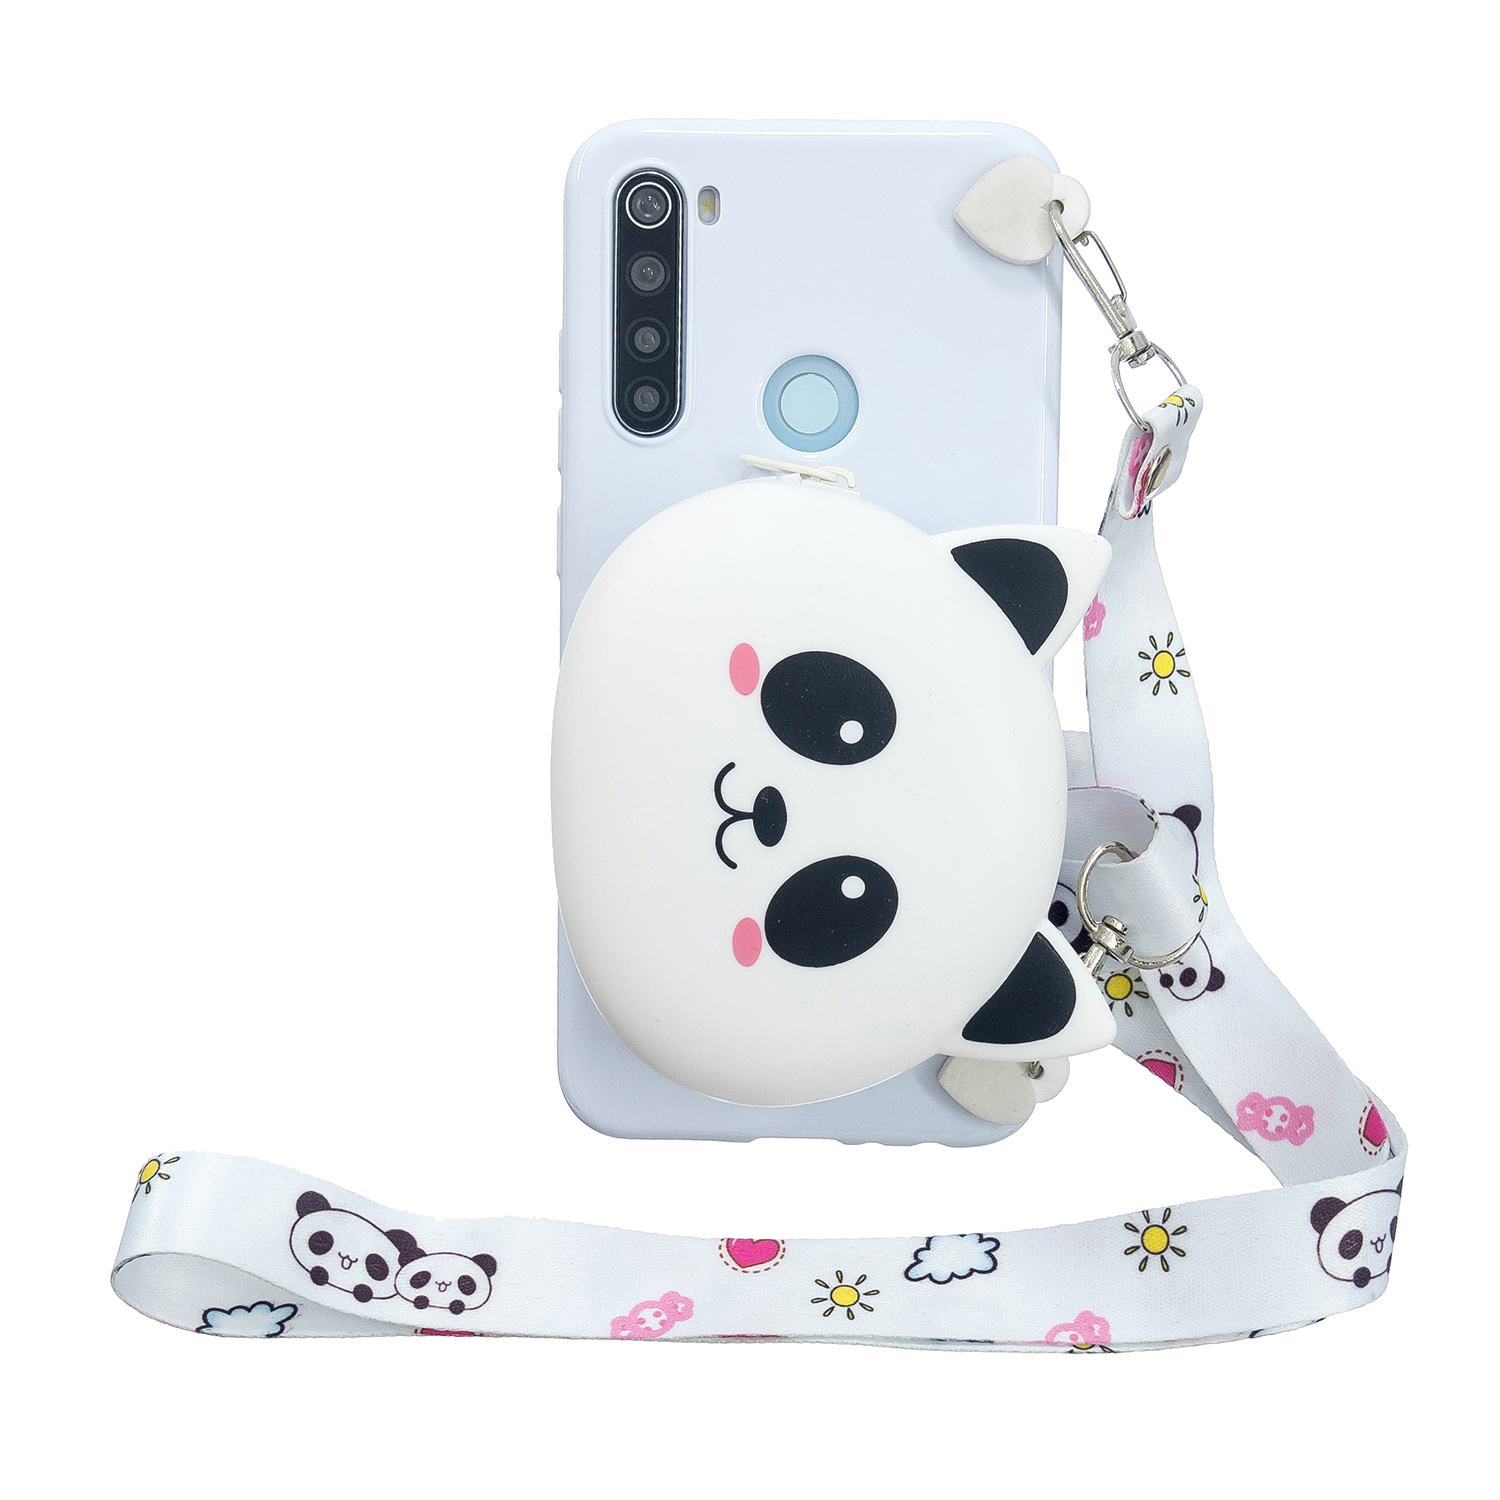 For Redmi Note 8/8T/8 Pro Cellphone Case Mobile Phone Shell Shockproof TPU Cover with Cartoon Cat Pig Panda Coin Purse Lovely Shoulder Starp  White